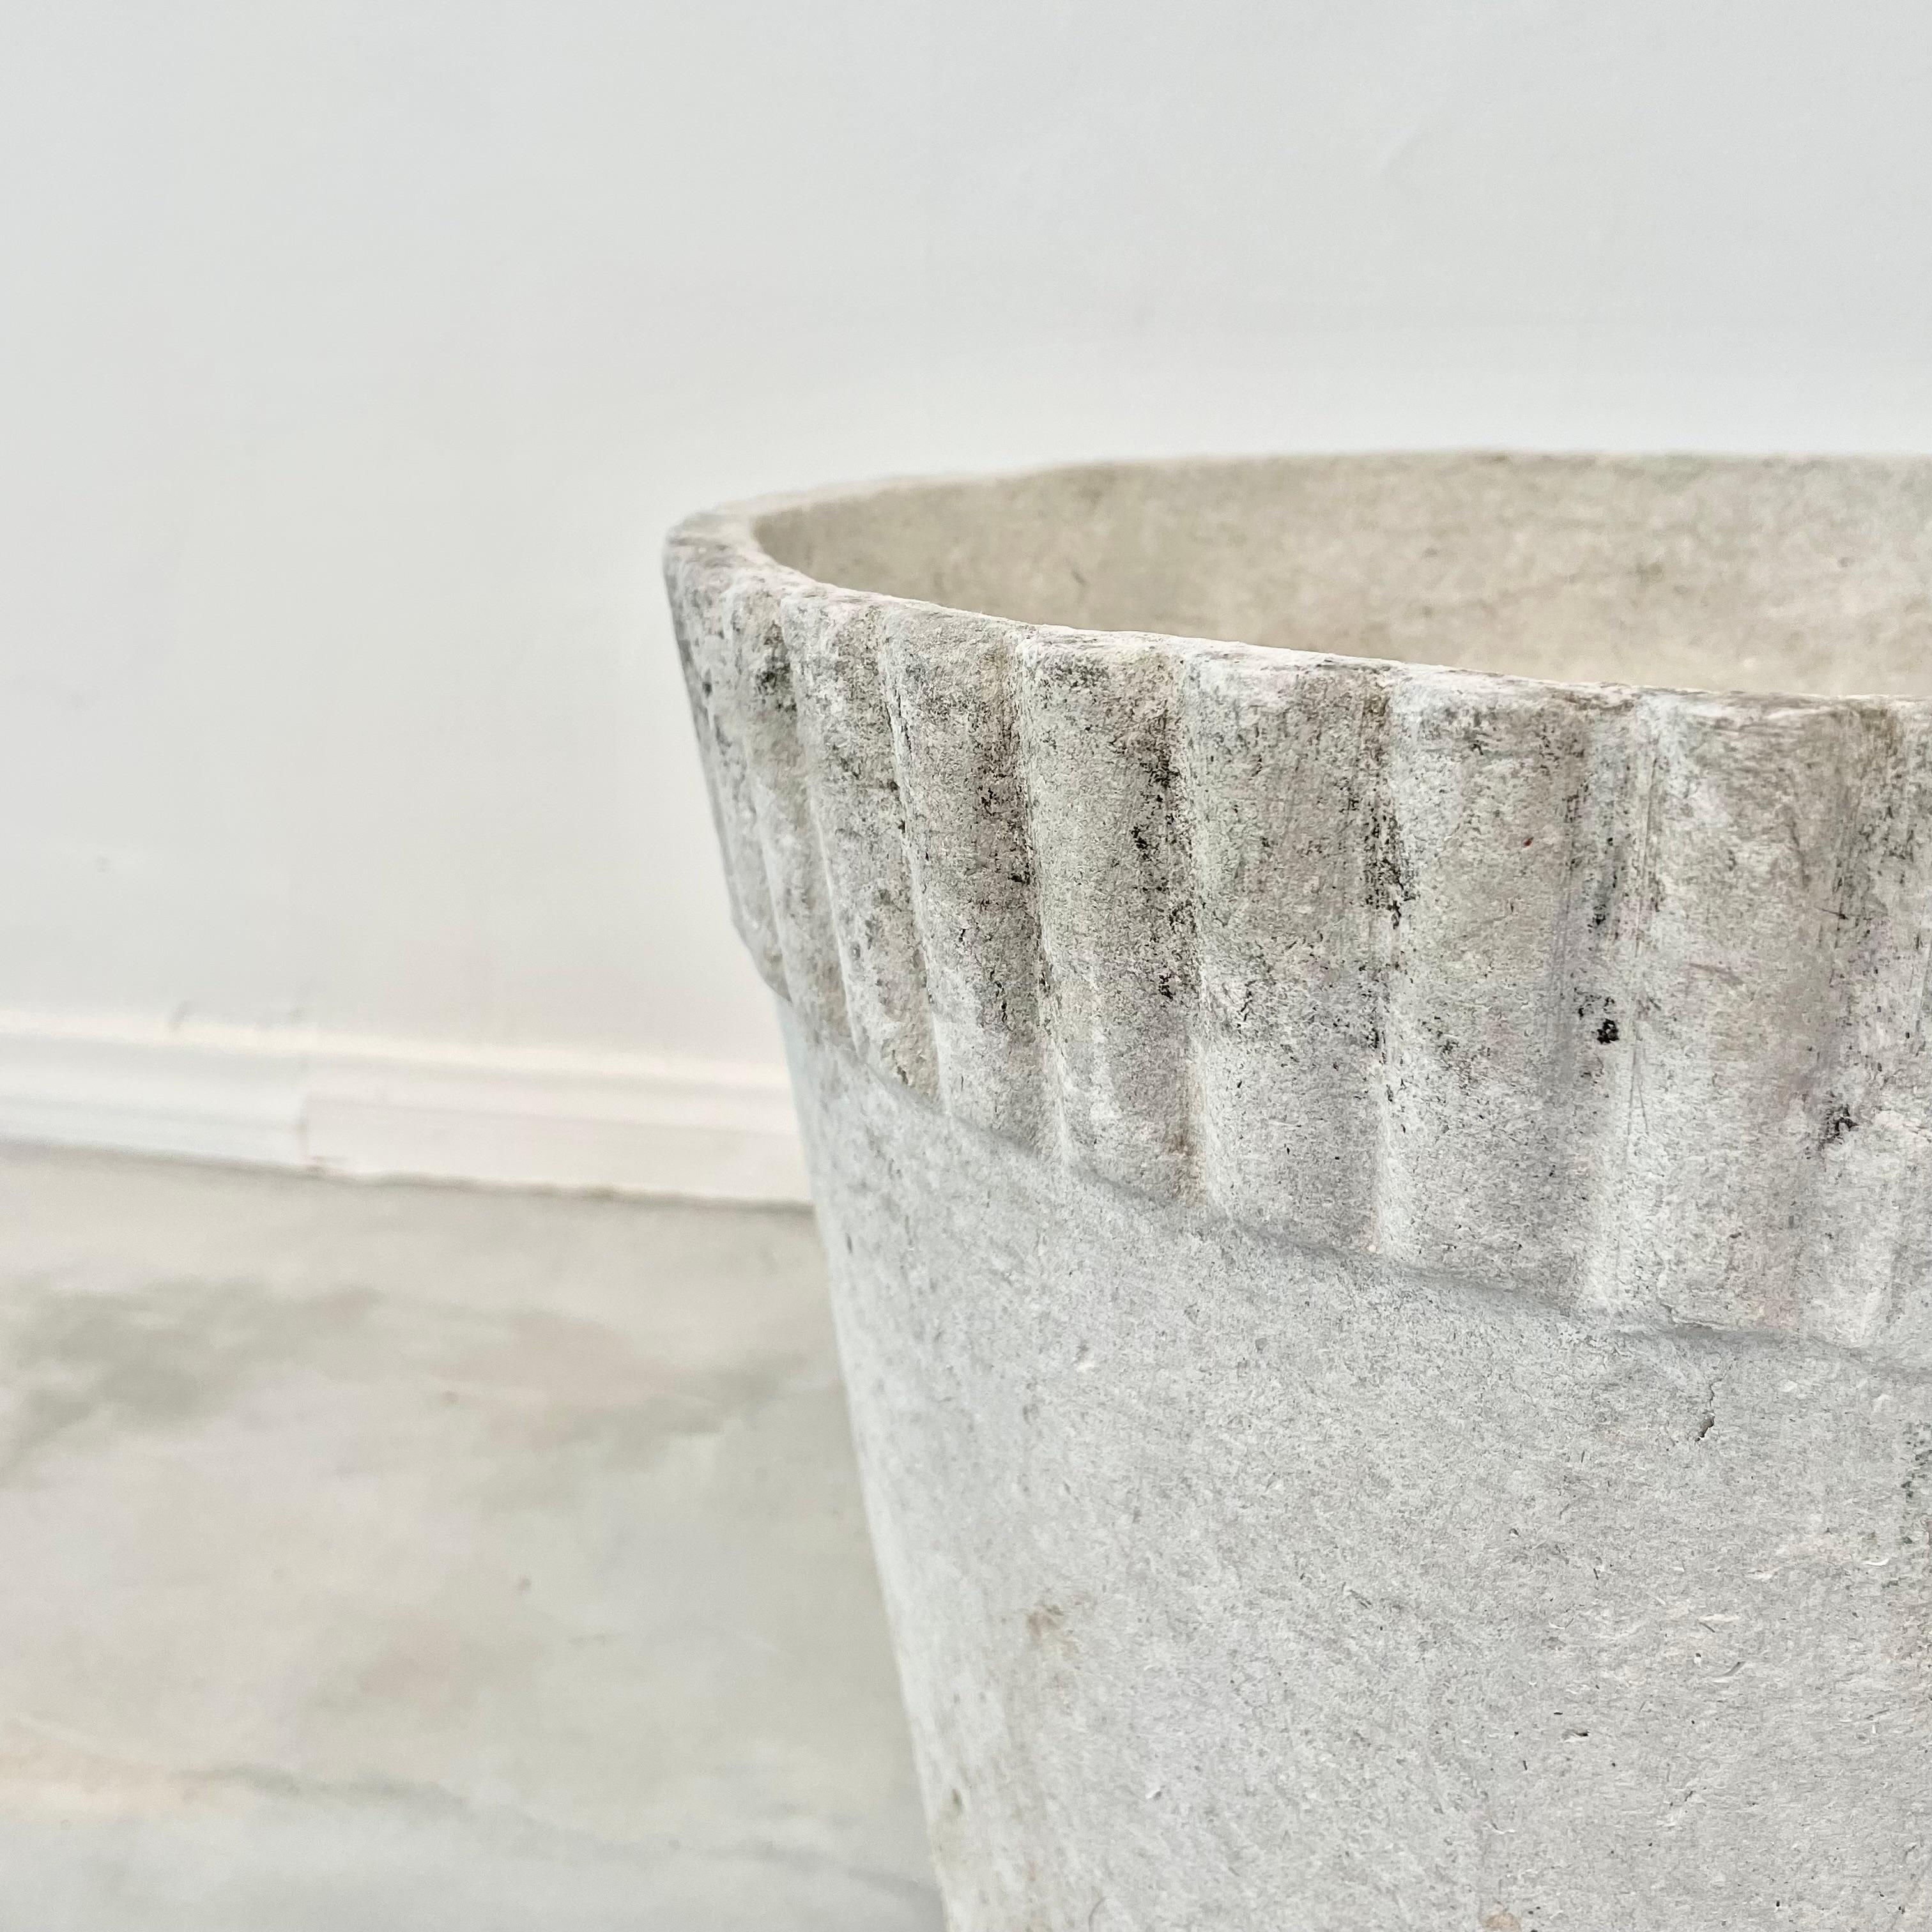 Concrete Large Willy Guhl Flower Pot, 1970s Switzerland For Sale